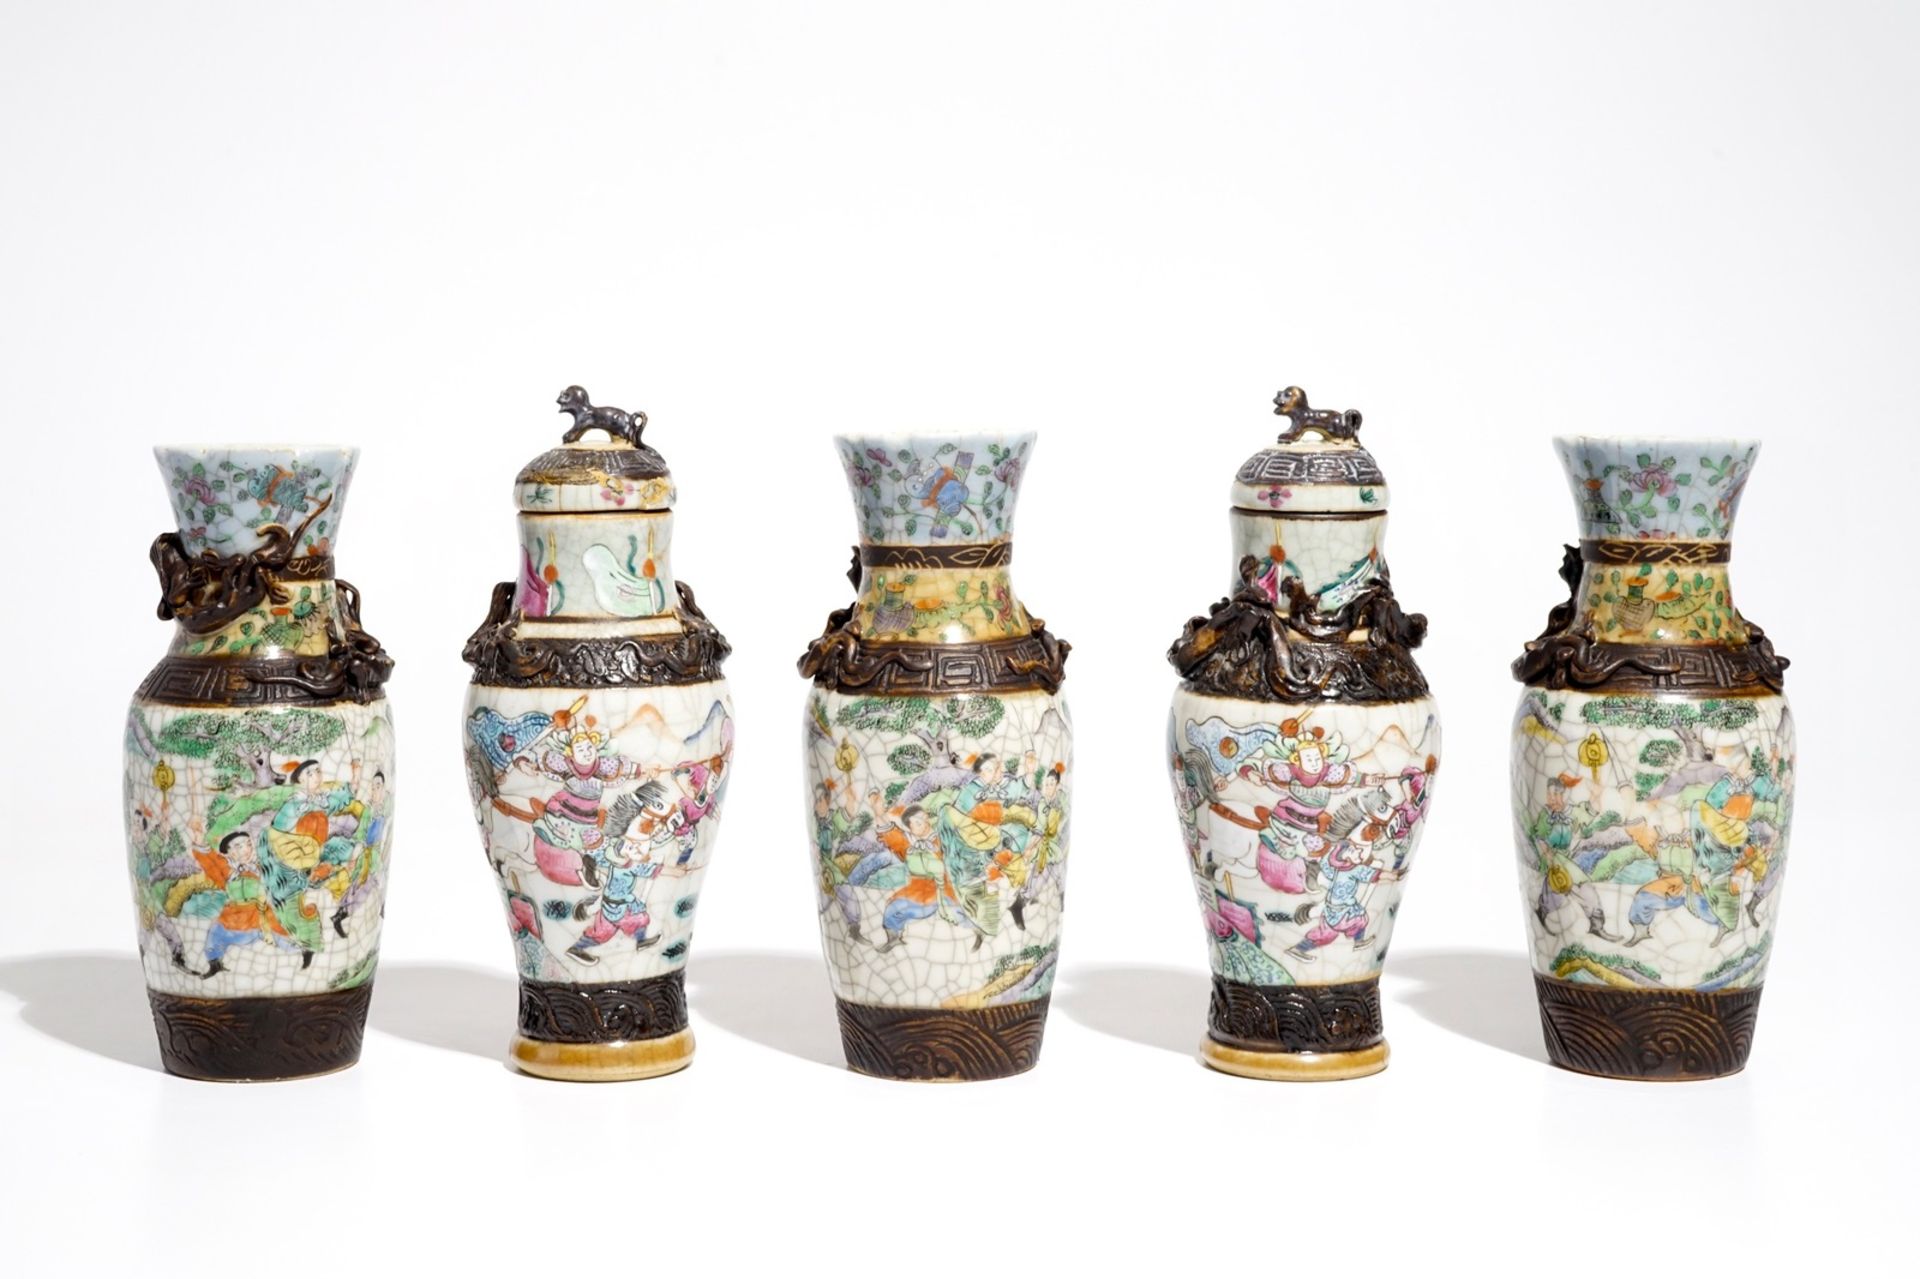 Two Chinese Nanking famille rose covered vases and three Nanking famille verte vases, 19th C. - Image 3 of 6